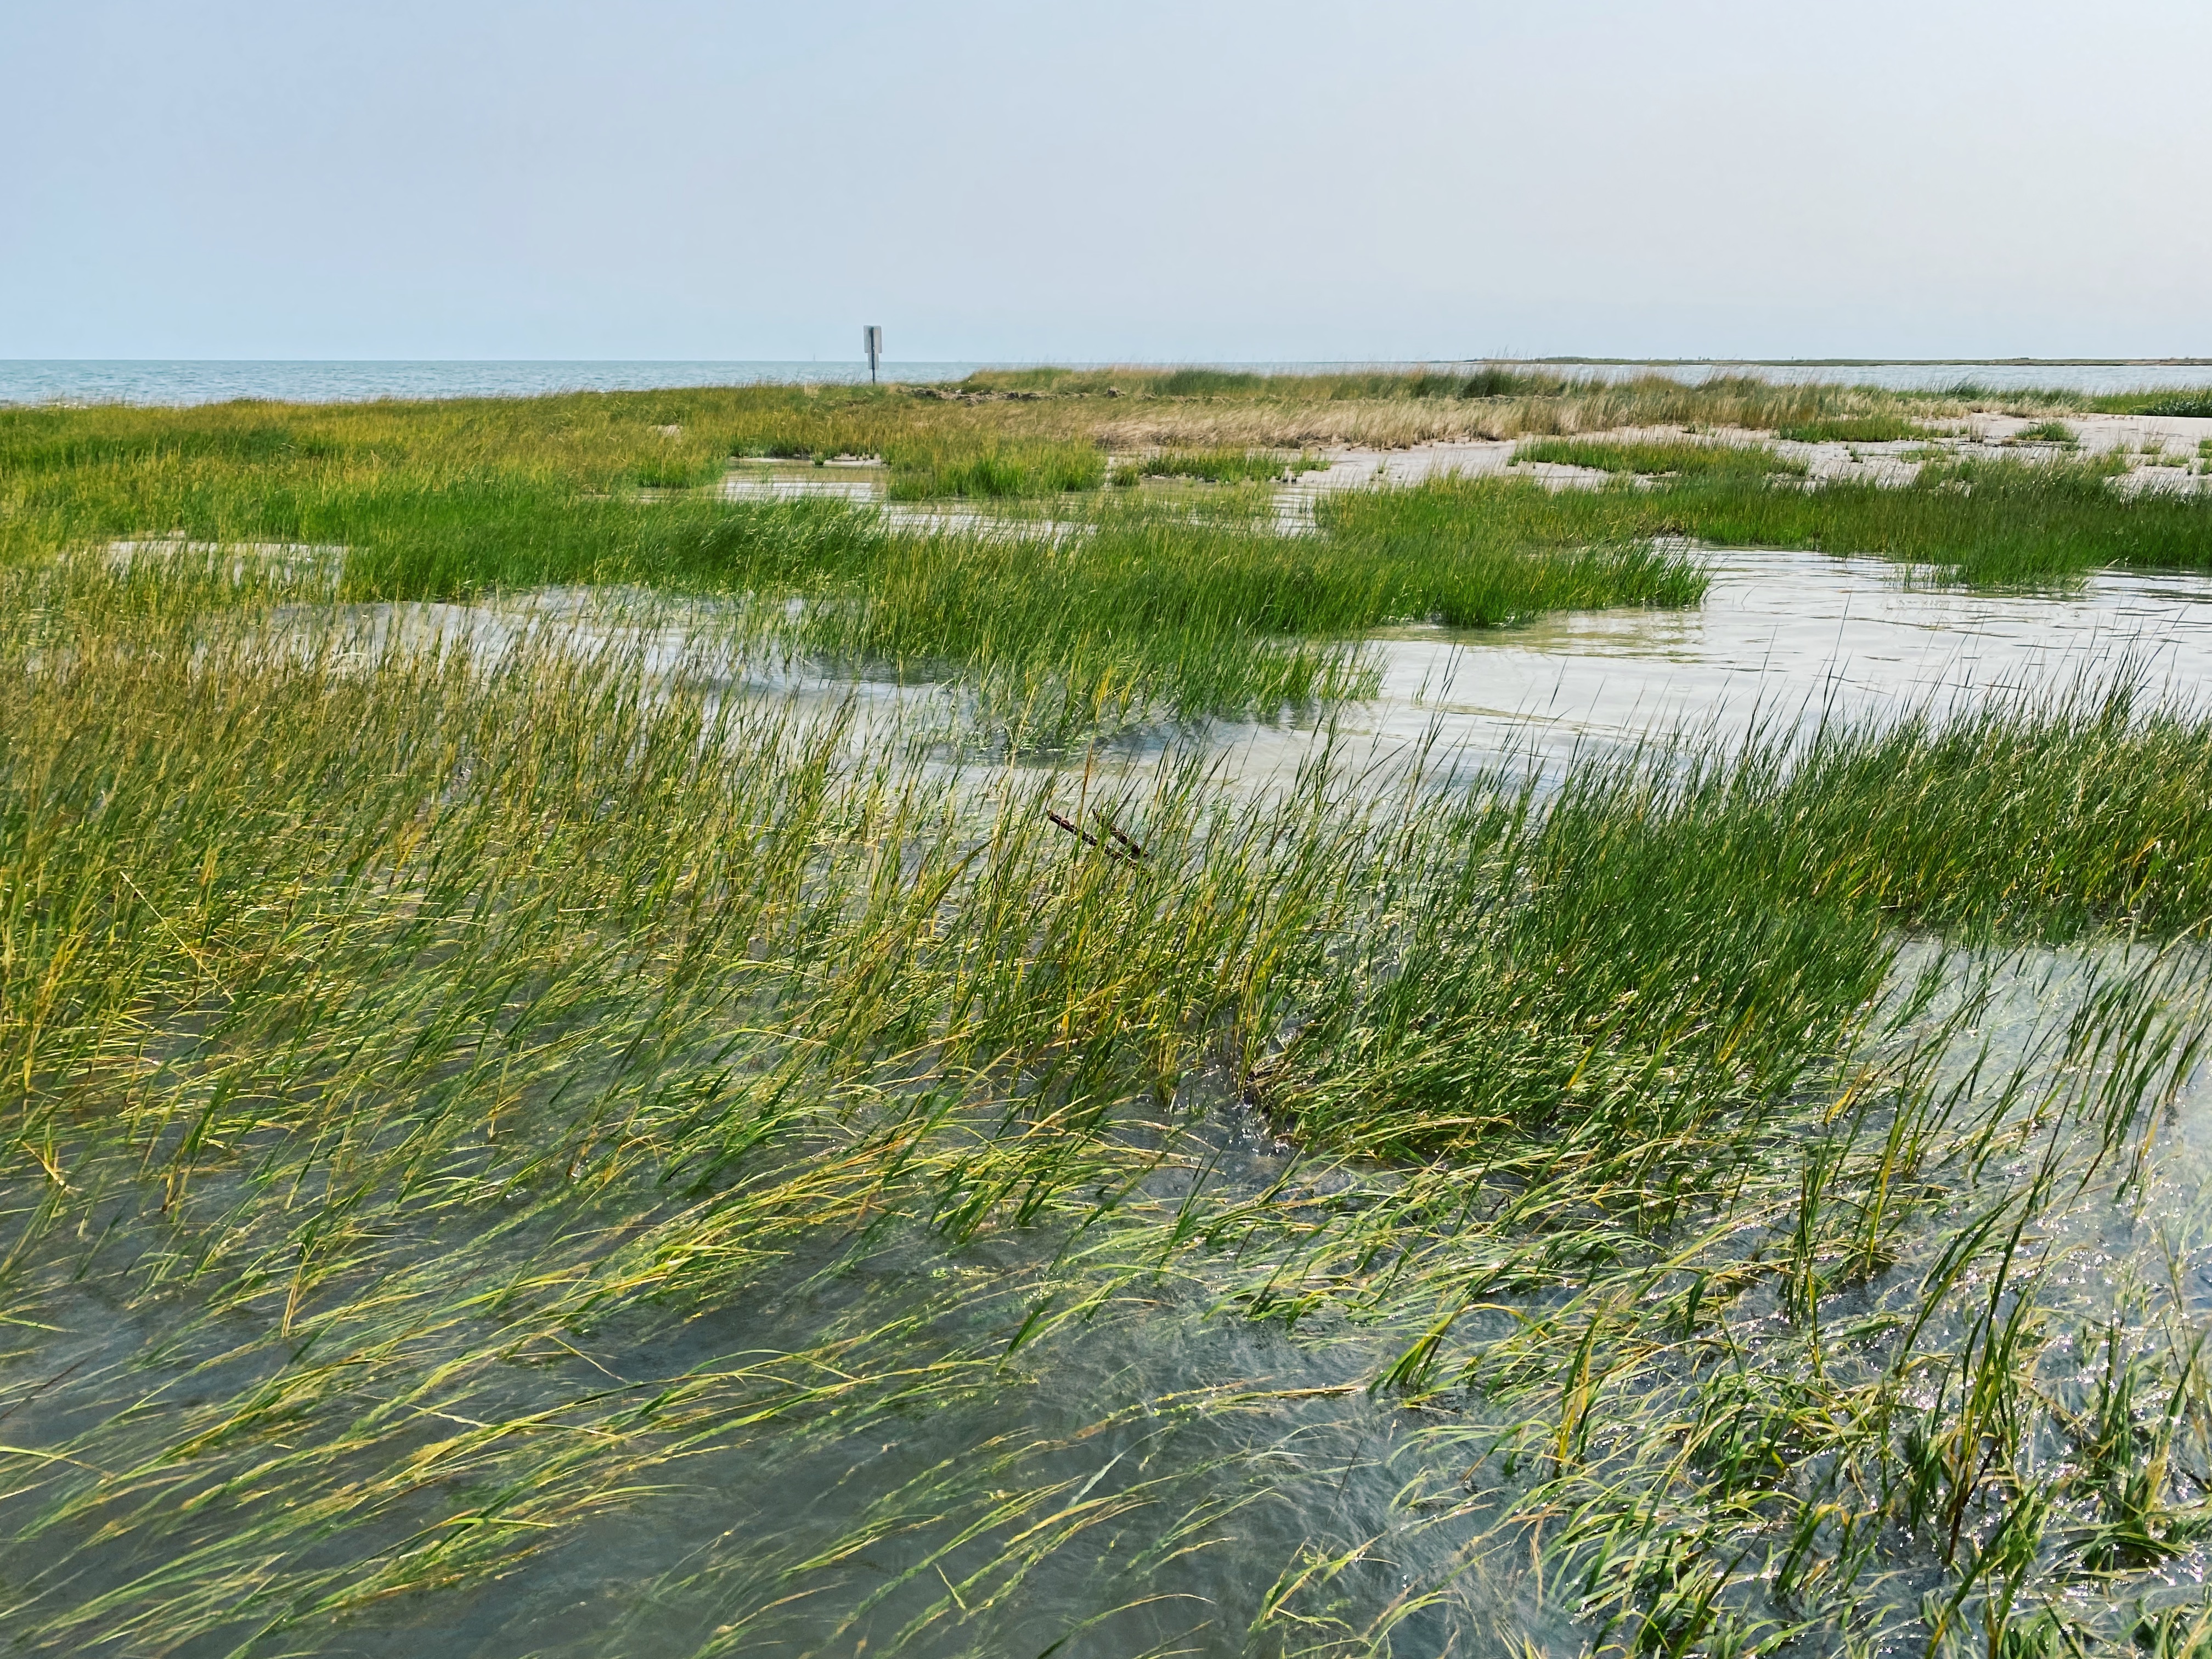 marsh grasses growing in the water